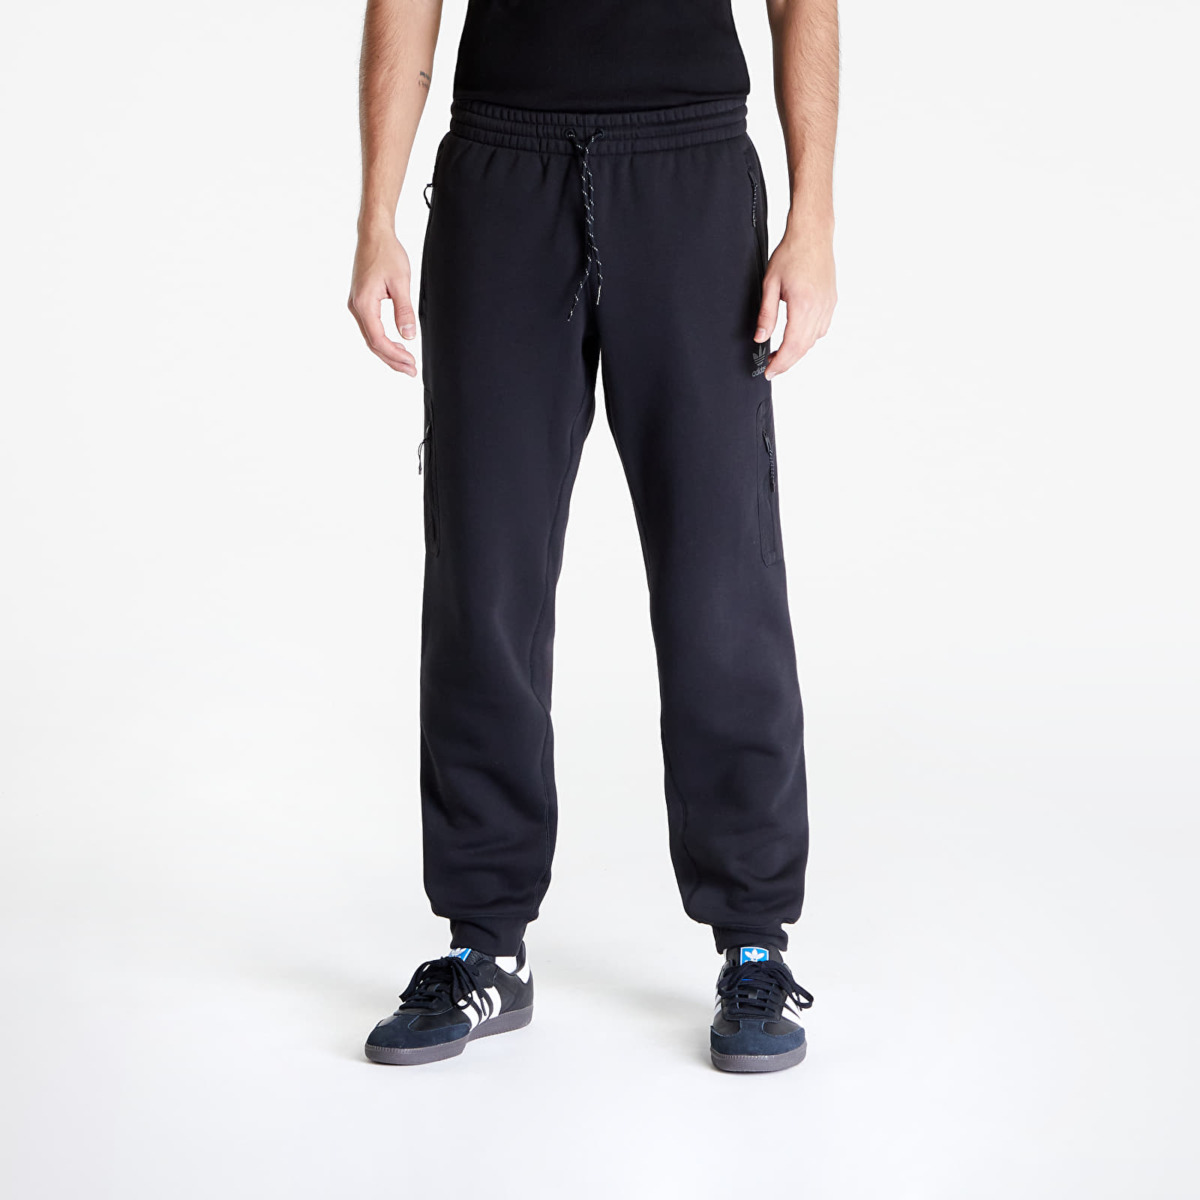 Footshop Sweatpants in Black for Man from Adidas GOOFASH